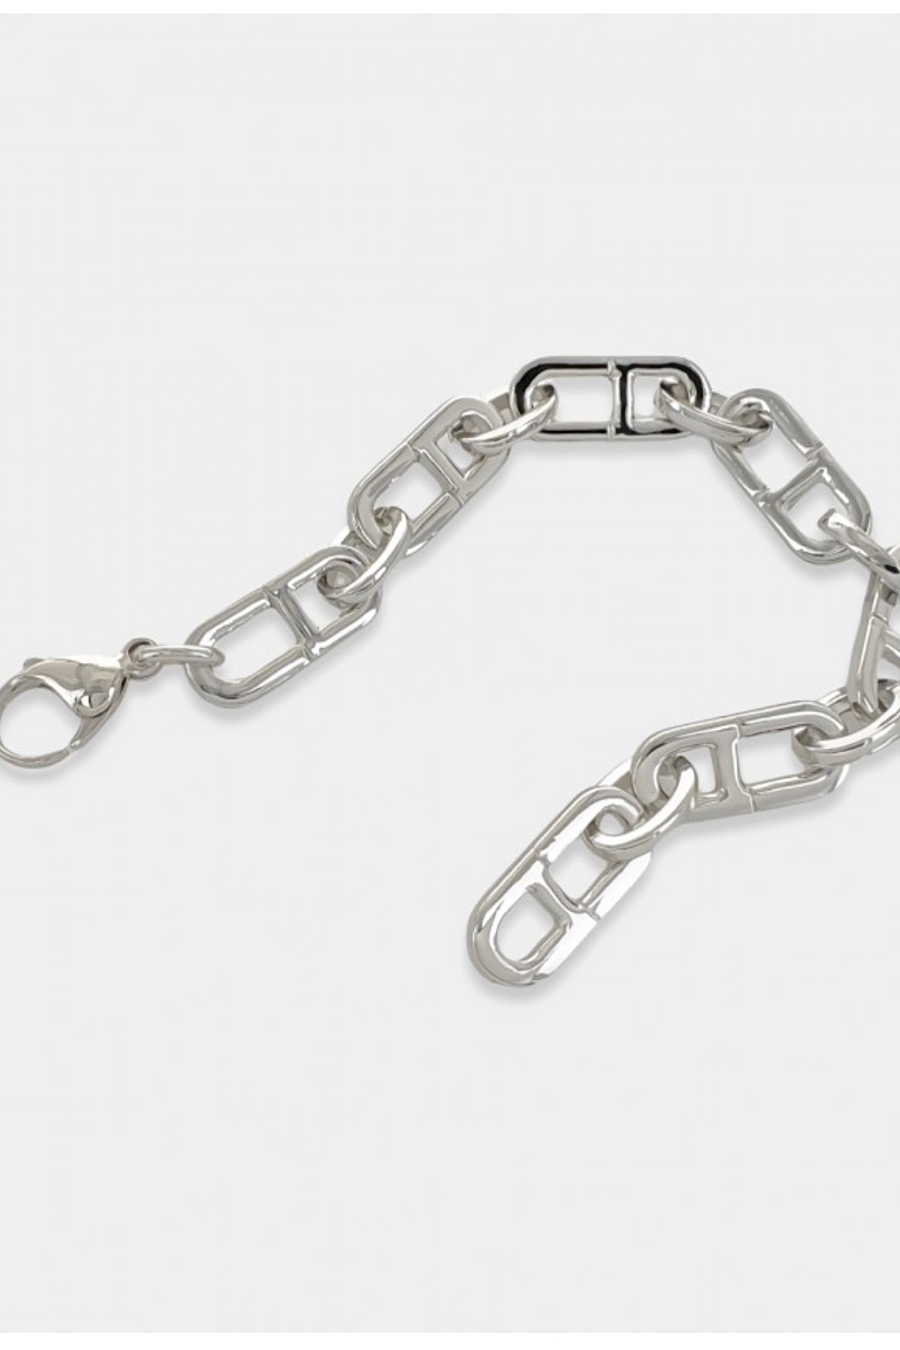 Mariner Chunky Chain Bracelet in Gold or Rhodium